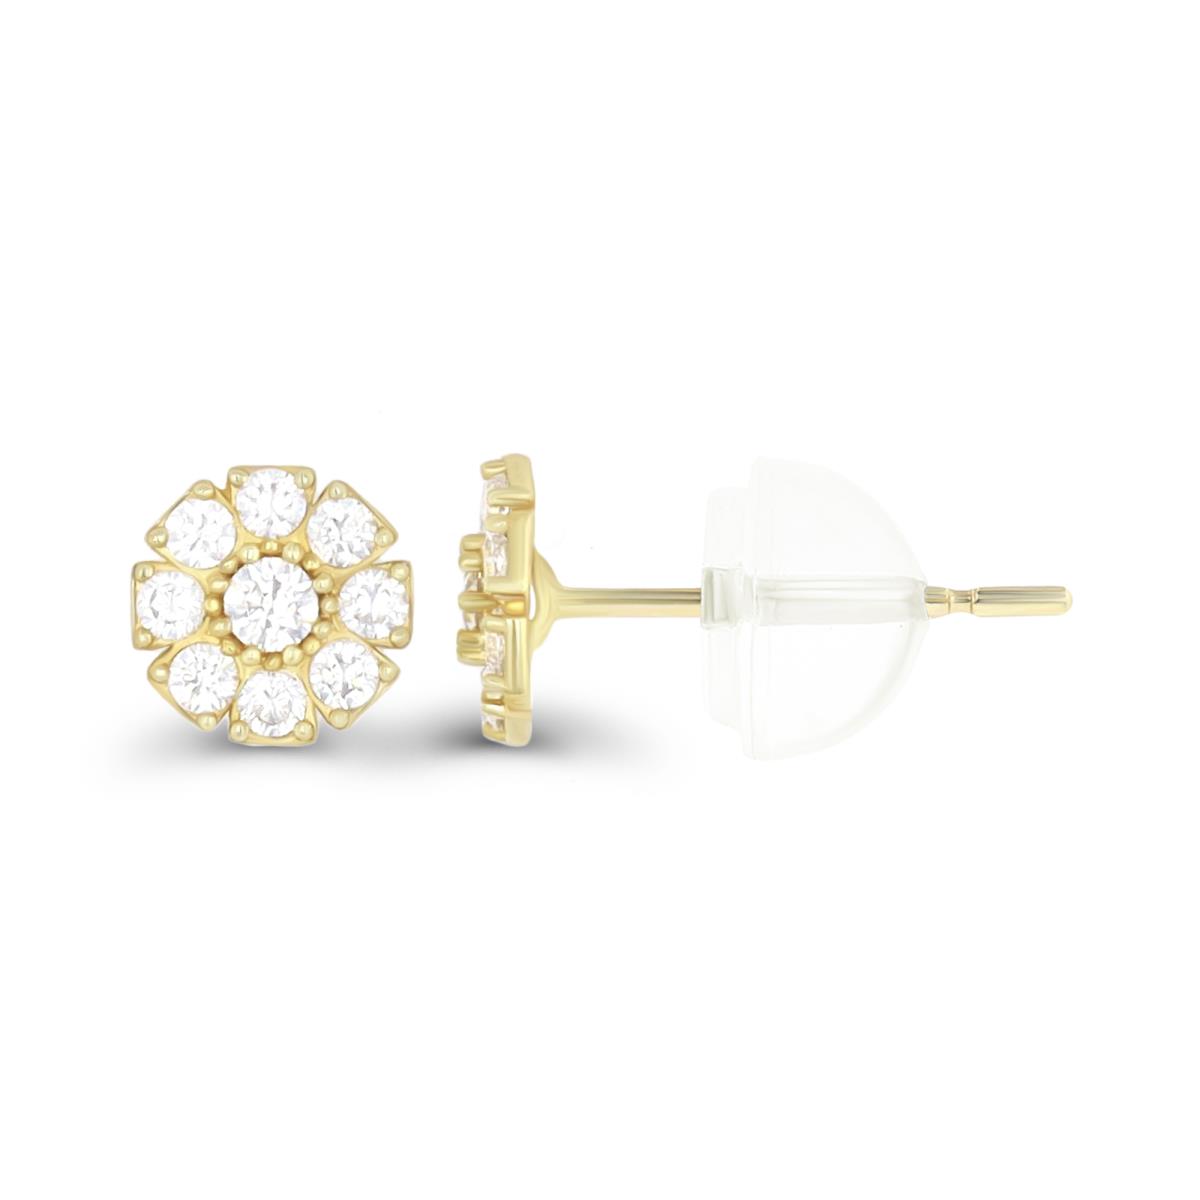 10K Yellow Gold Micropave Flower CZ Stud Earring